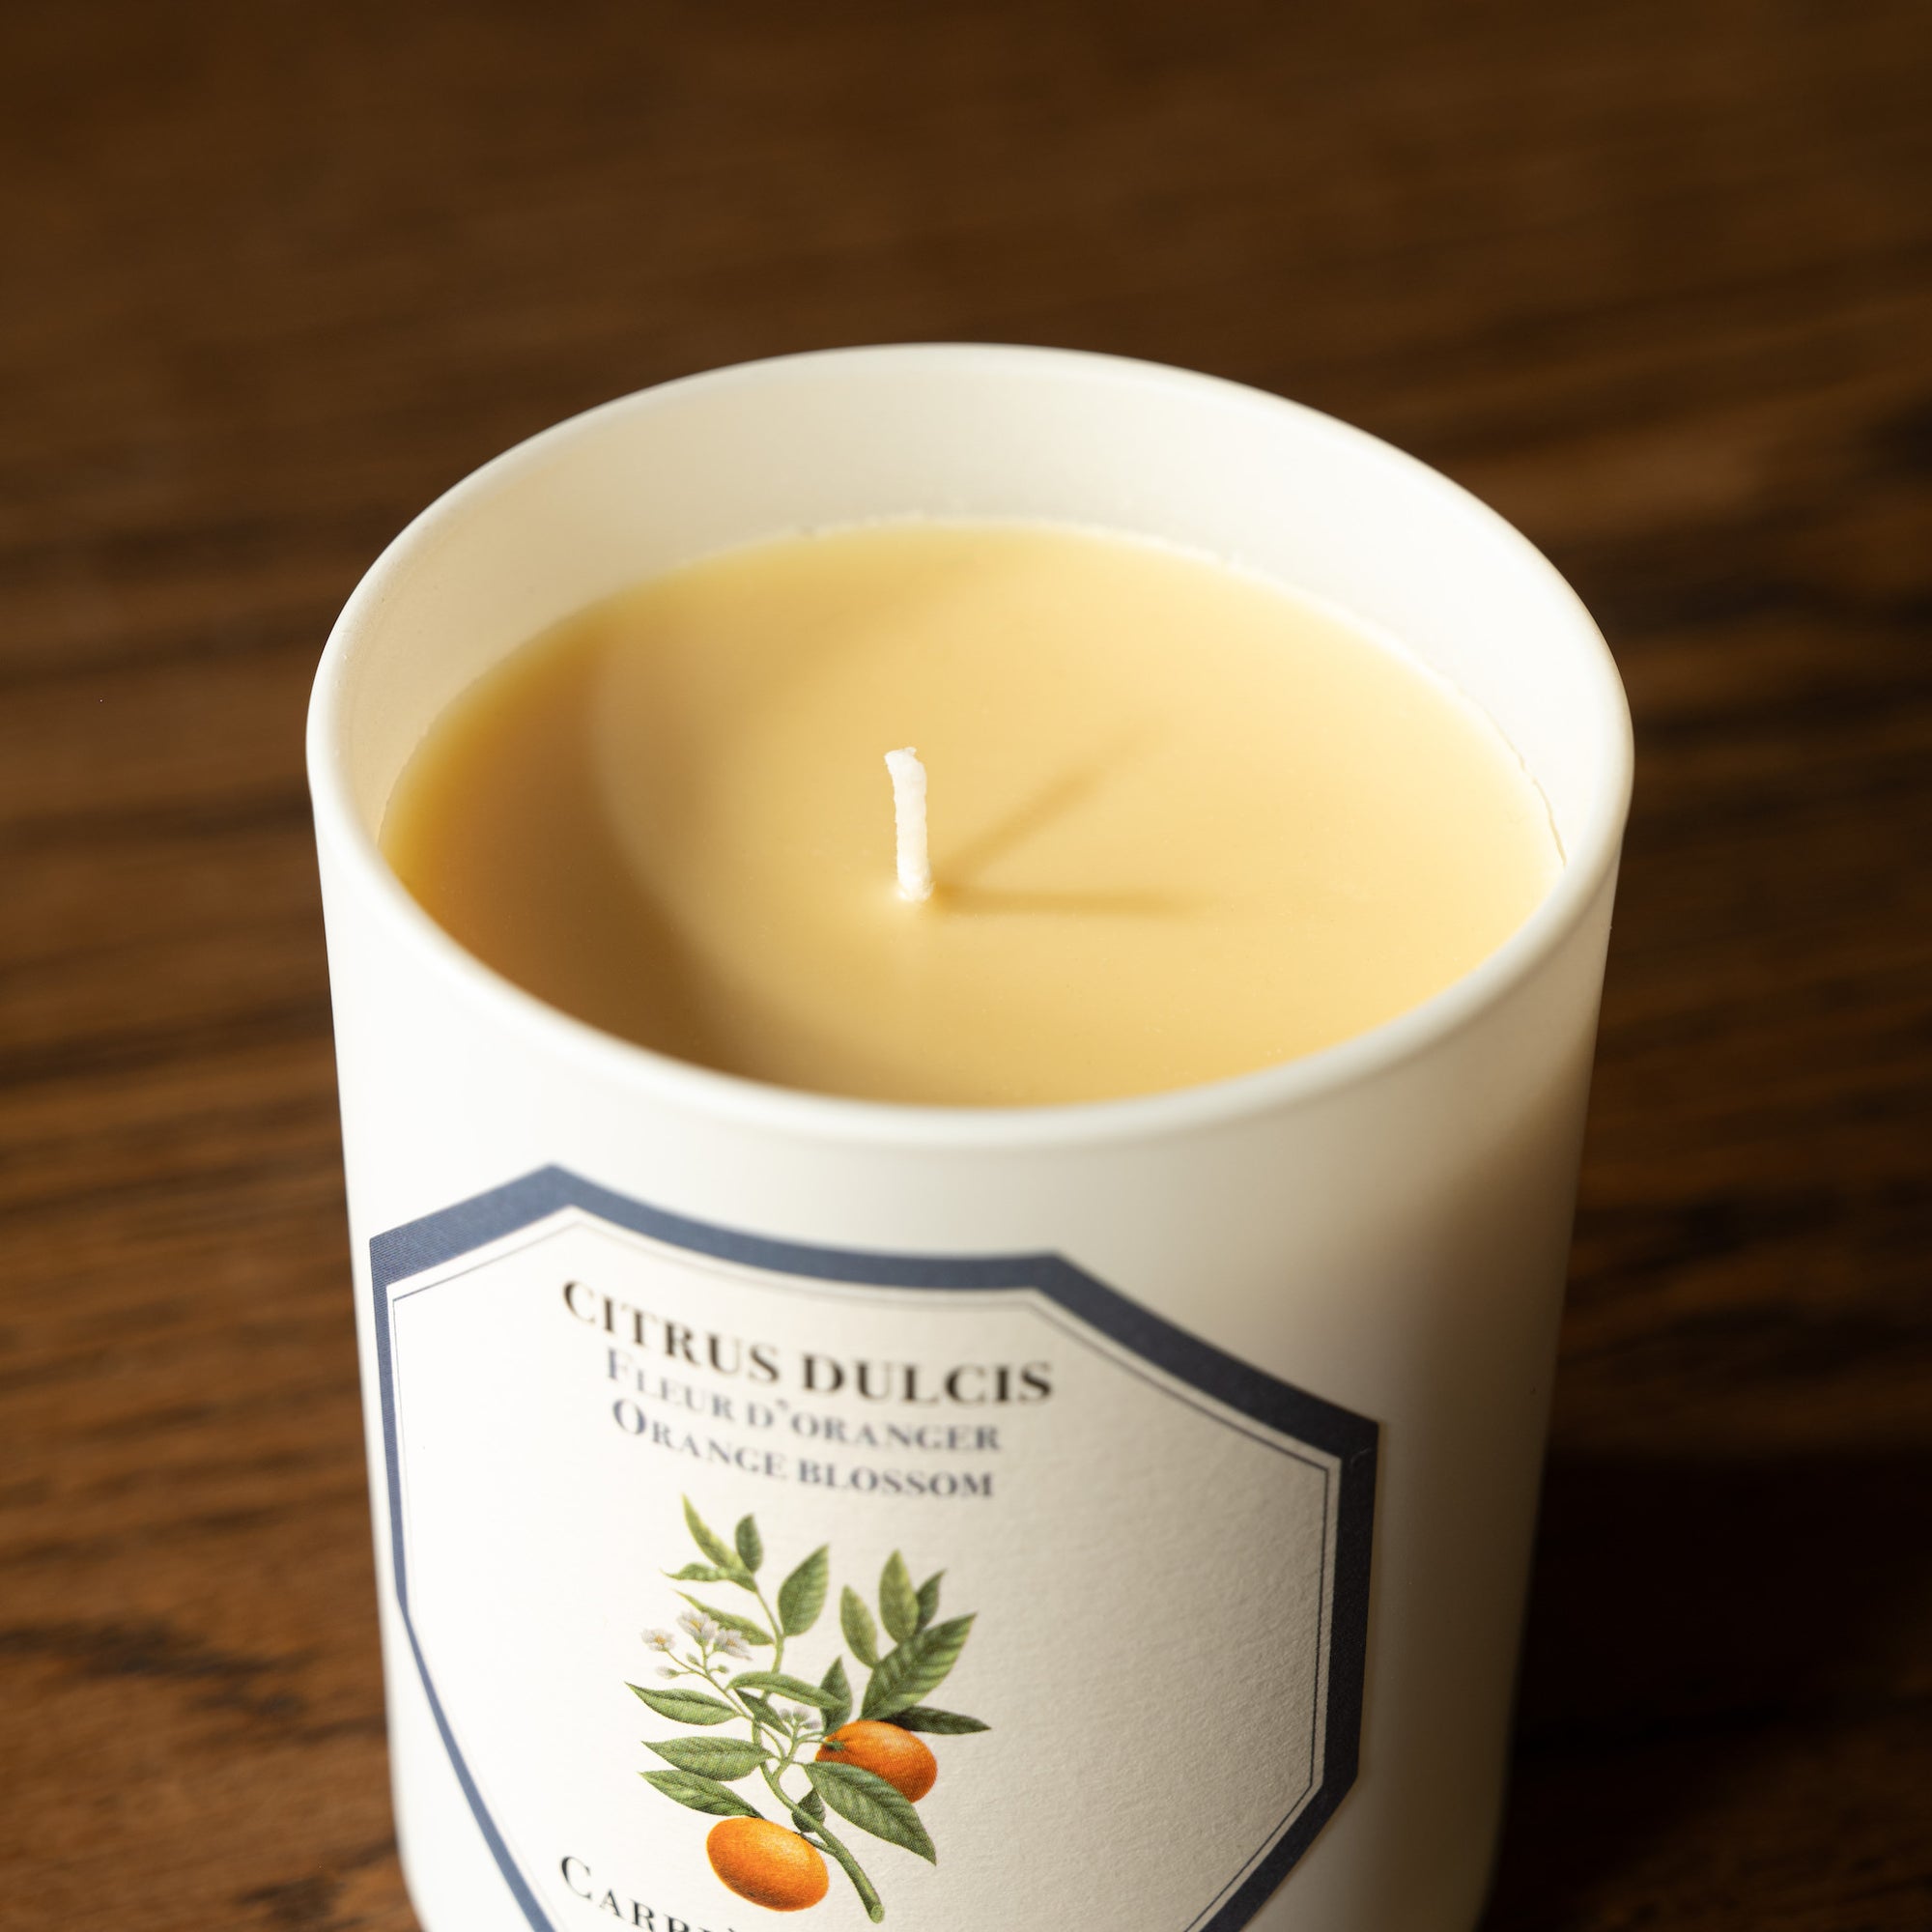 Carriere Freres Orange Blossom Candle wax & wick